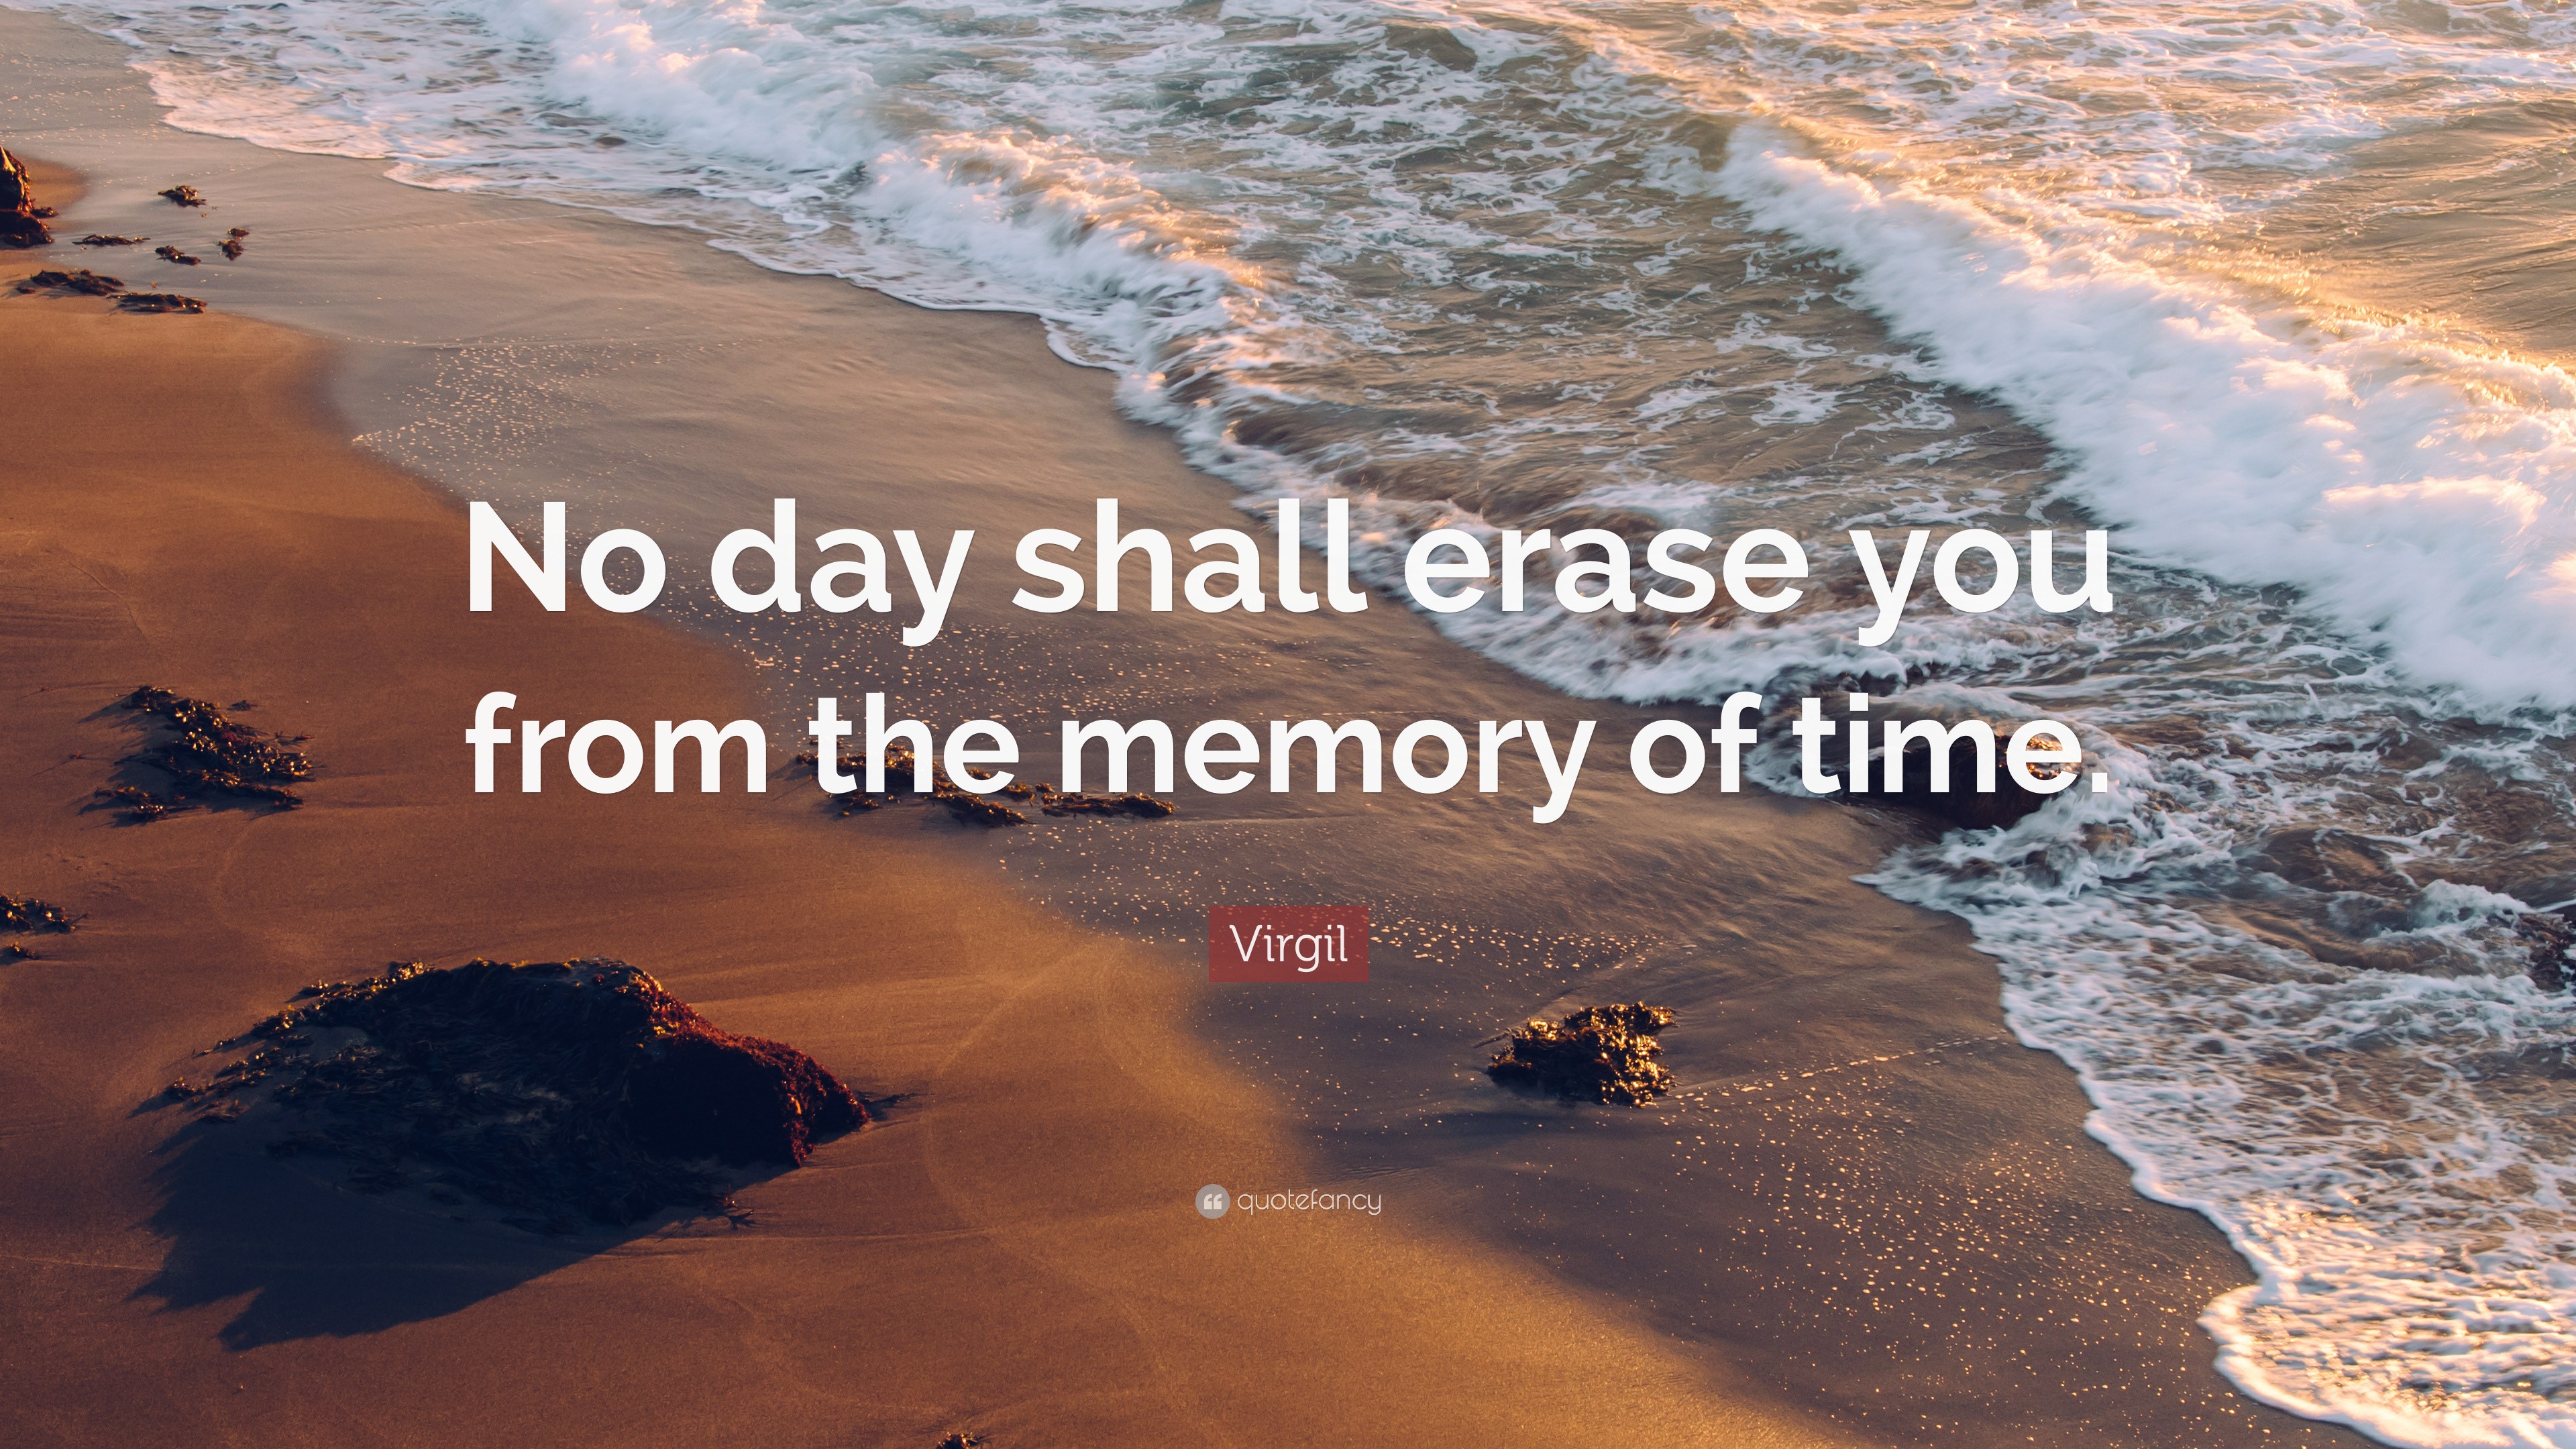 Virgil Quote: “No day shall erase you from the memory of time.”